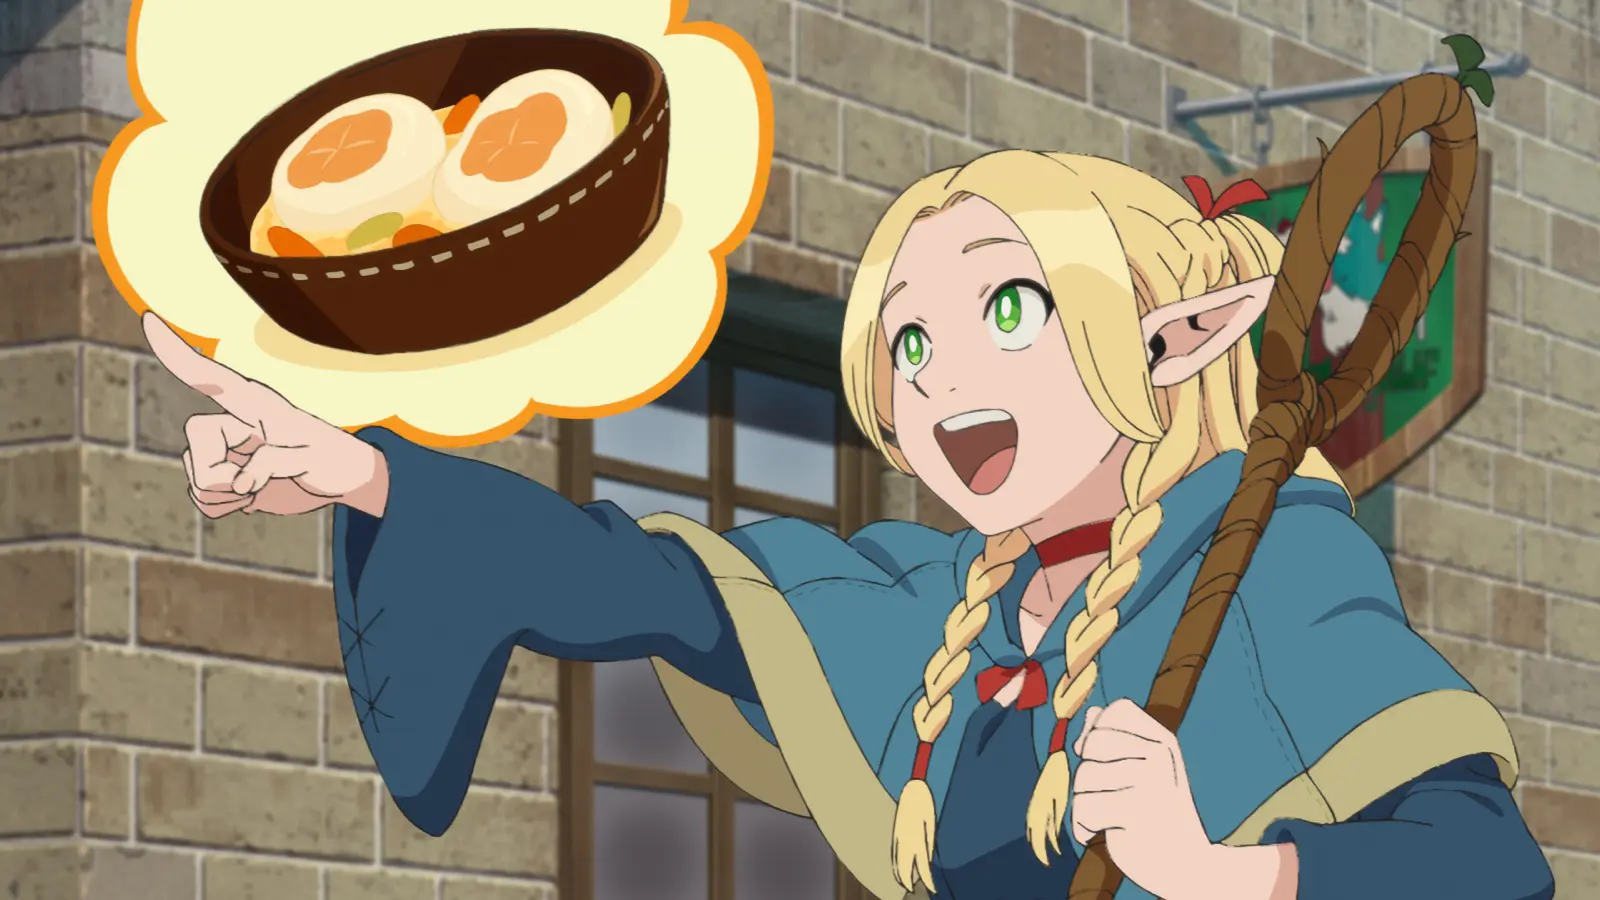 Delicious in Dungeon - Episode 1 Preview